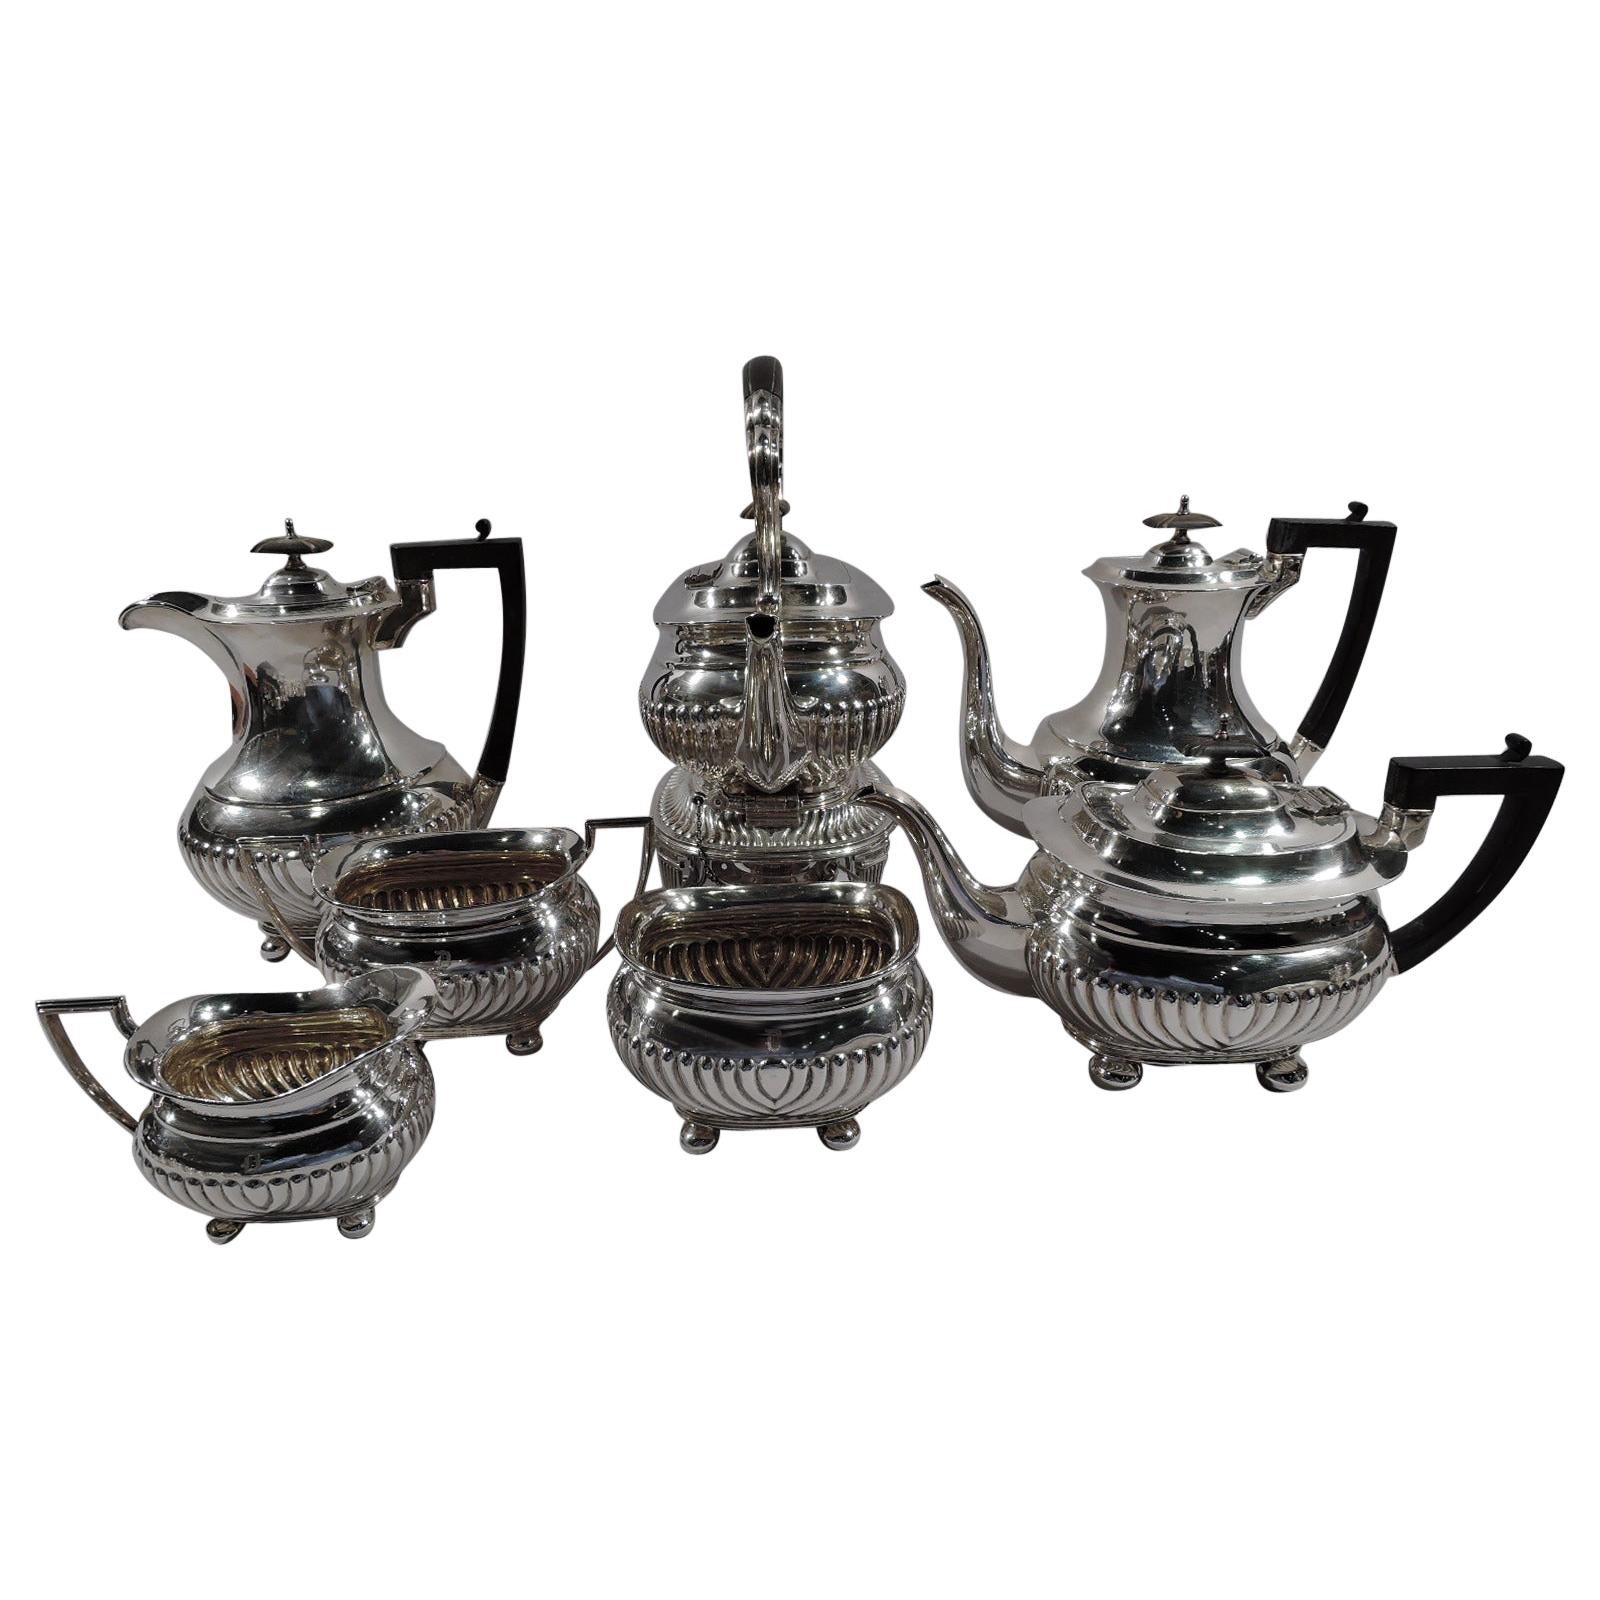 English Georgian Sterling Silver Coffee and Tea Set by Mappin & Webb